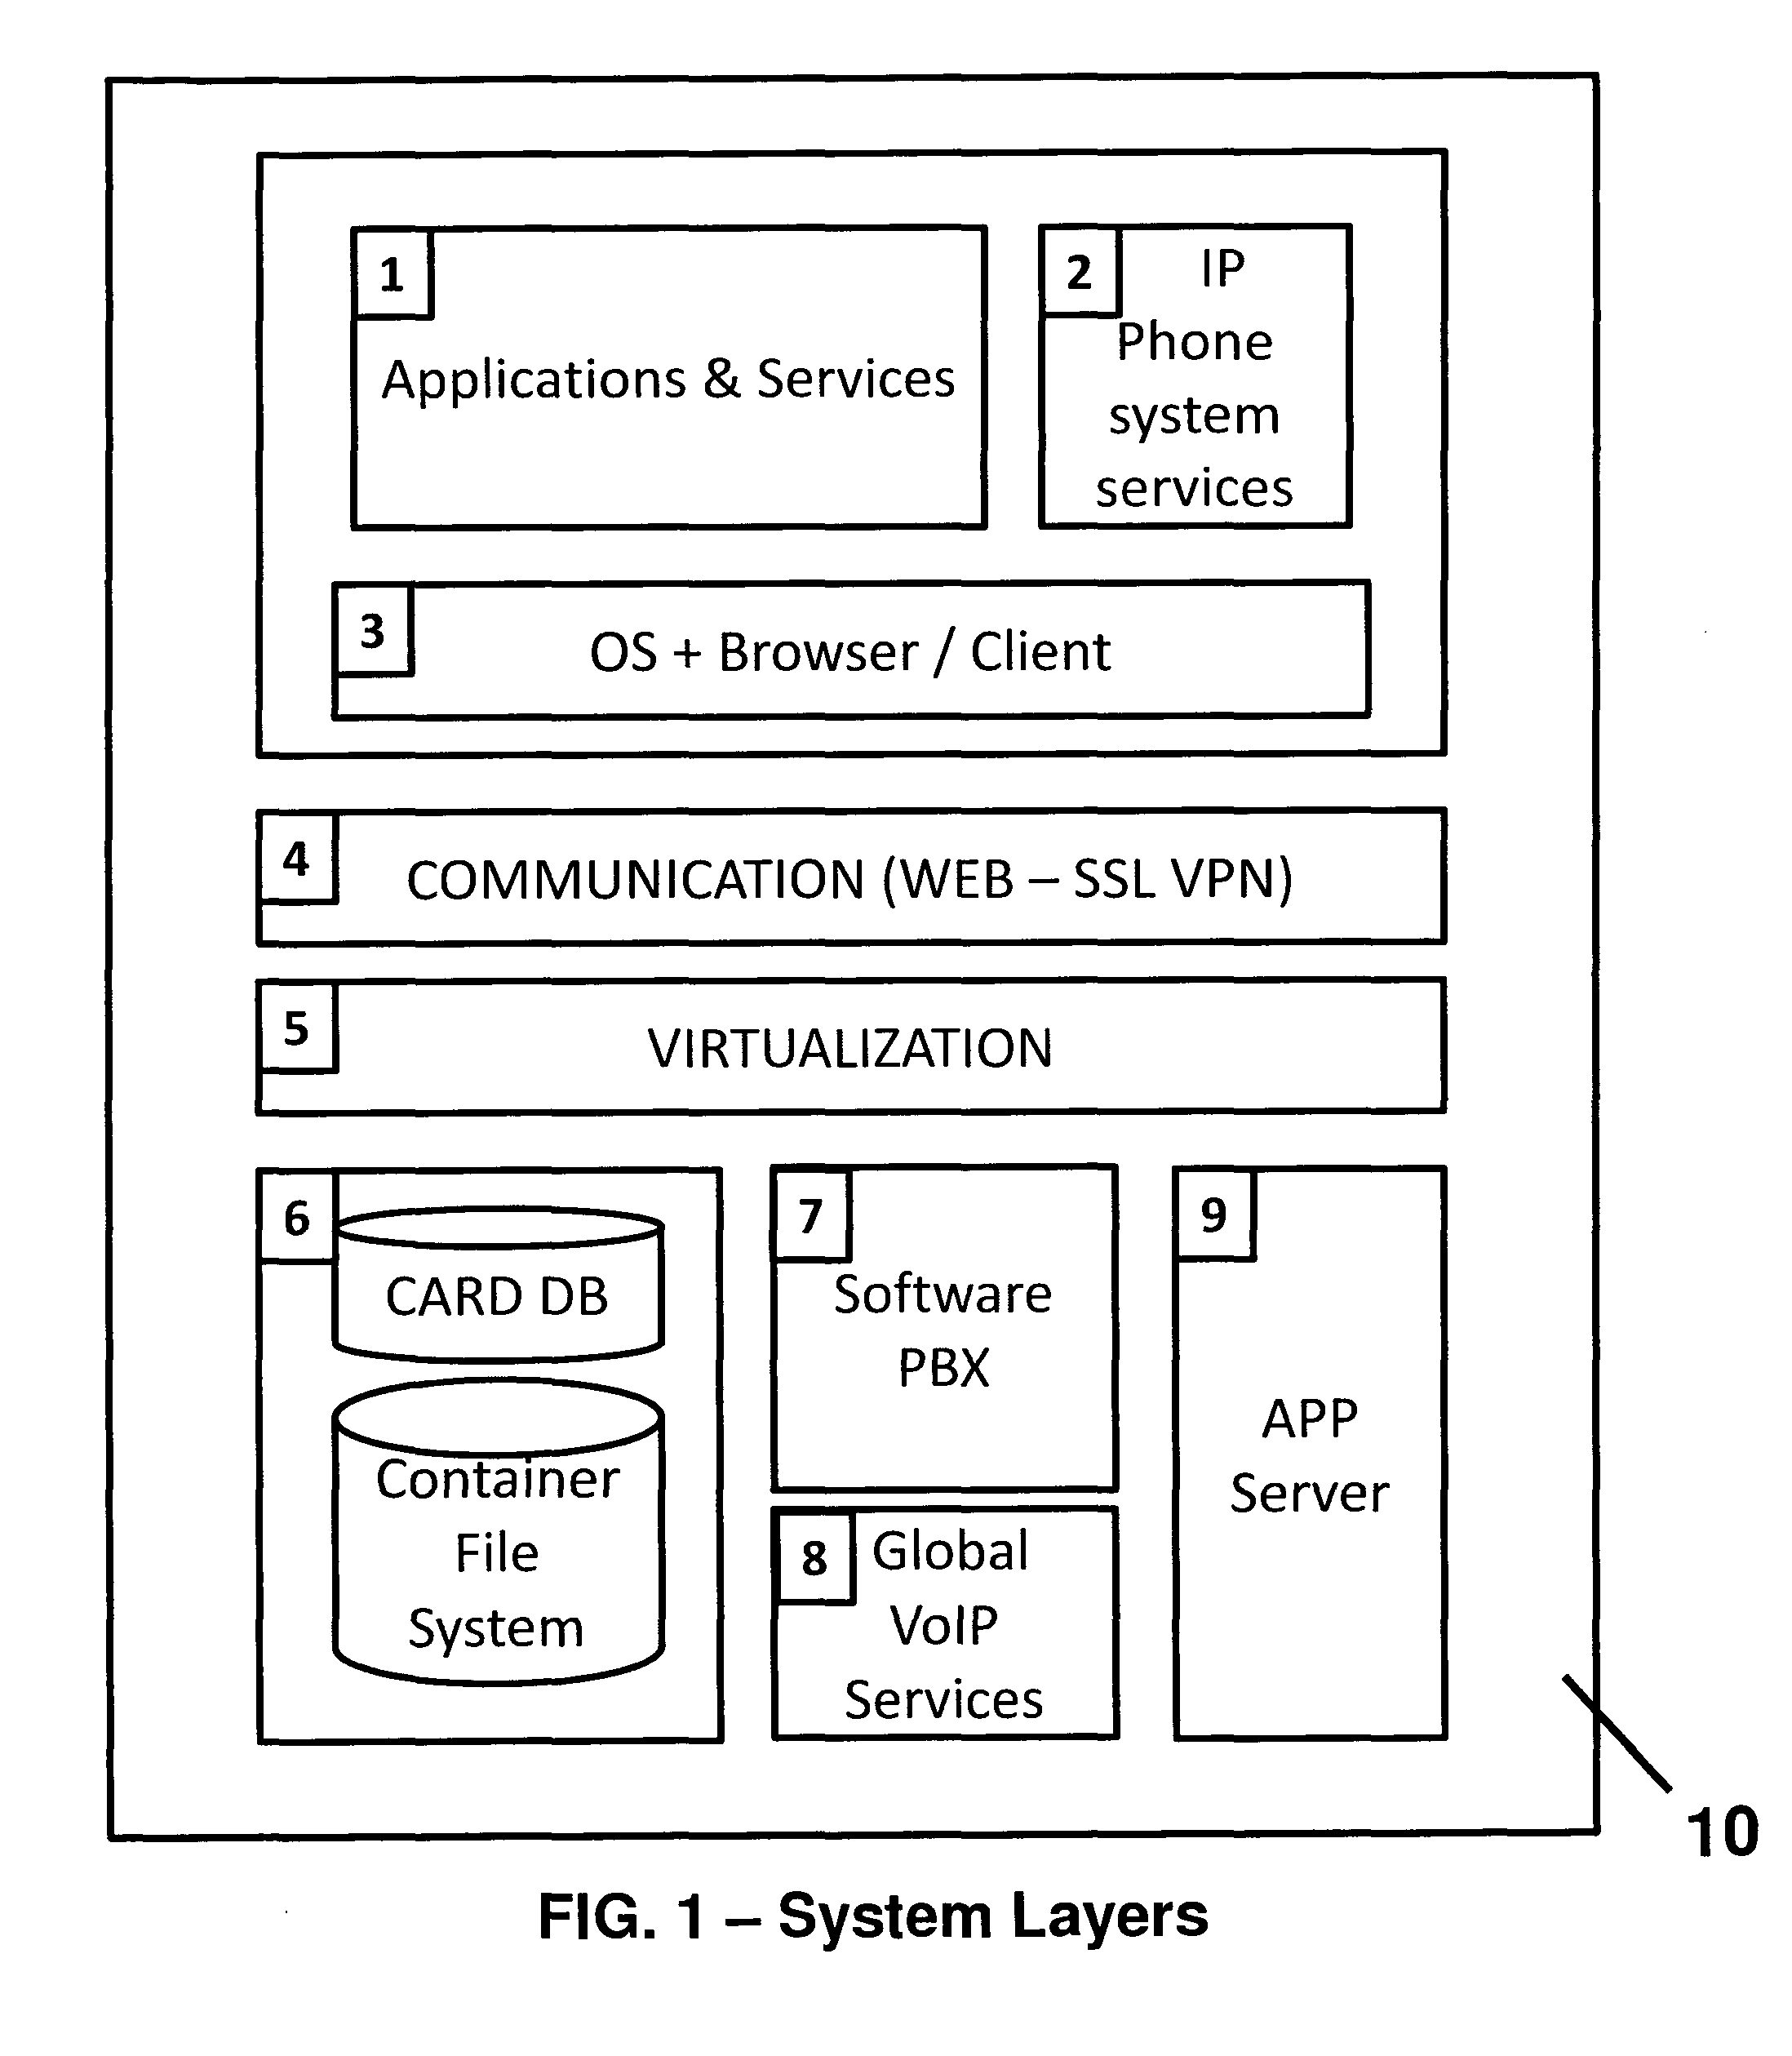 System for the management of files